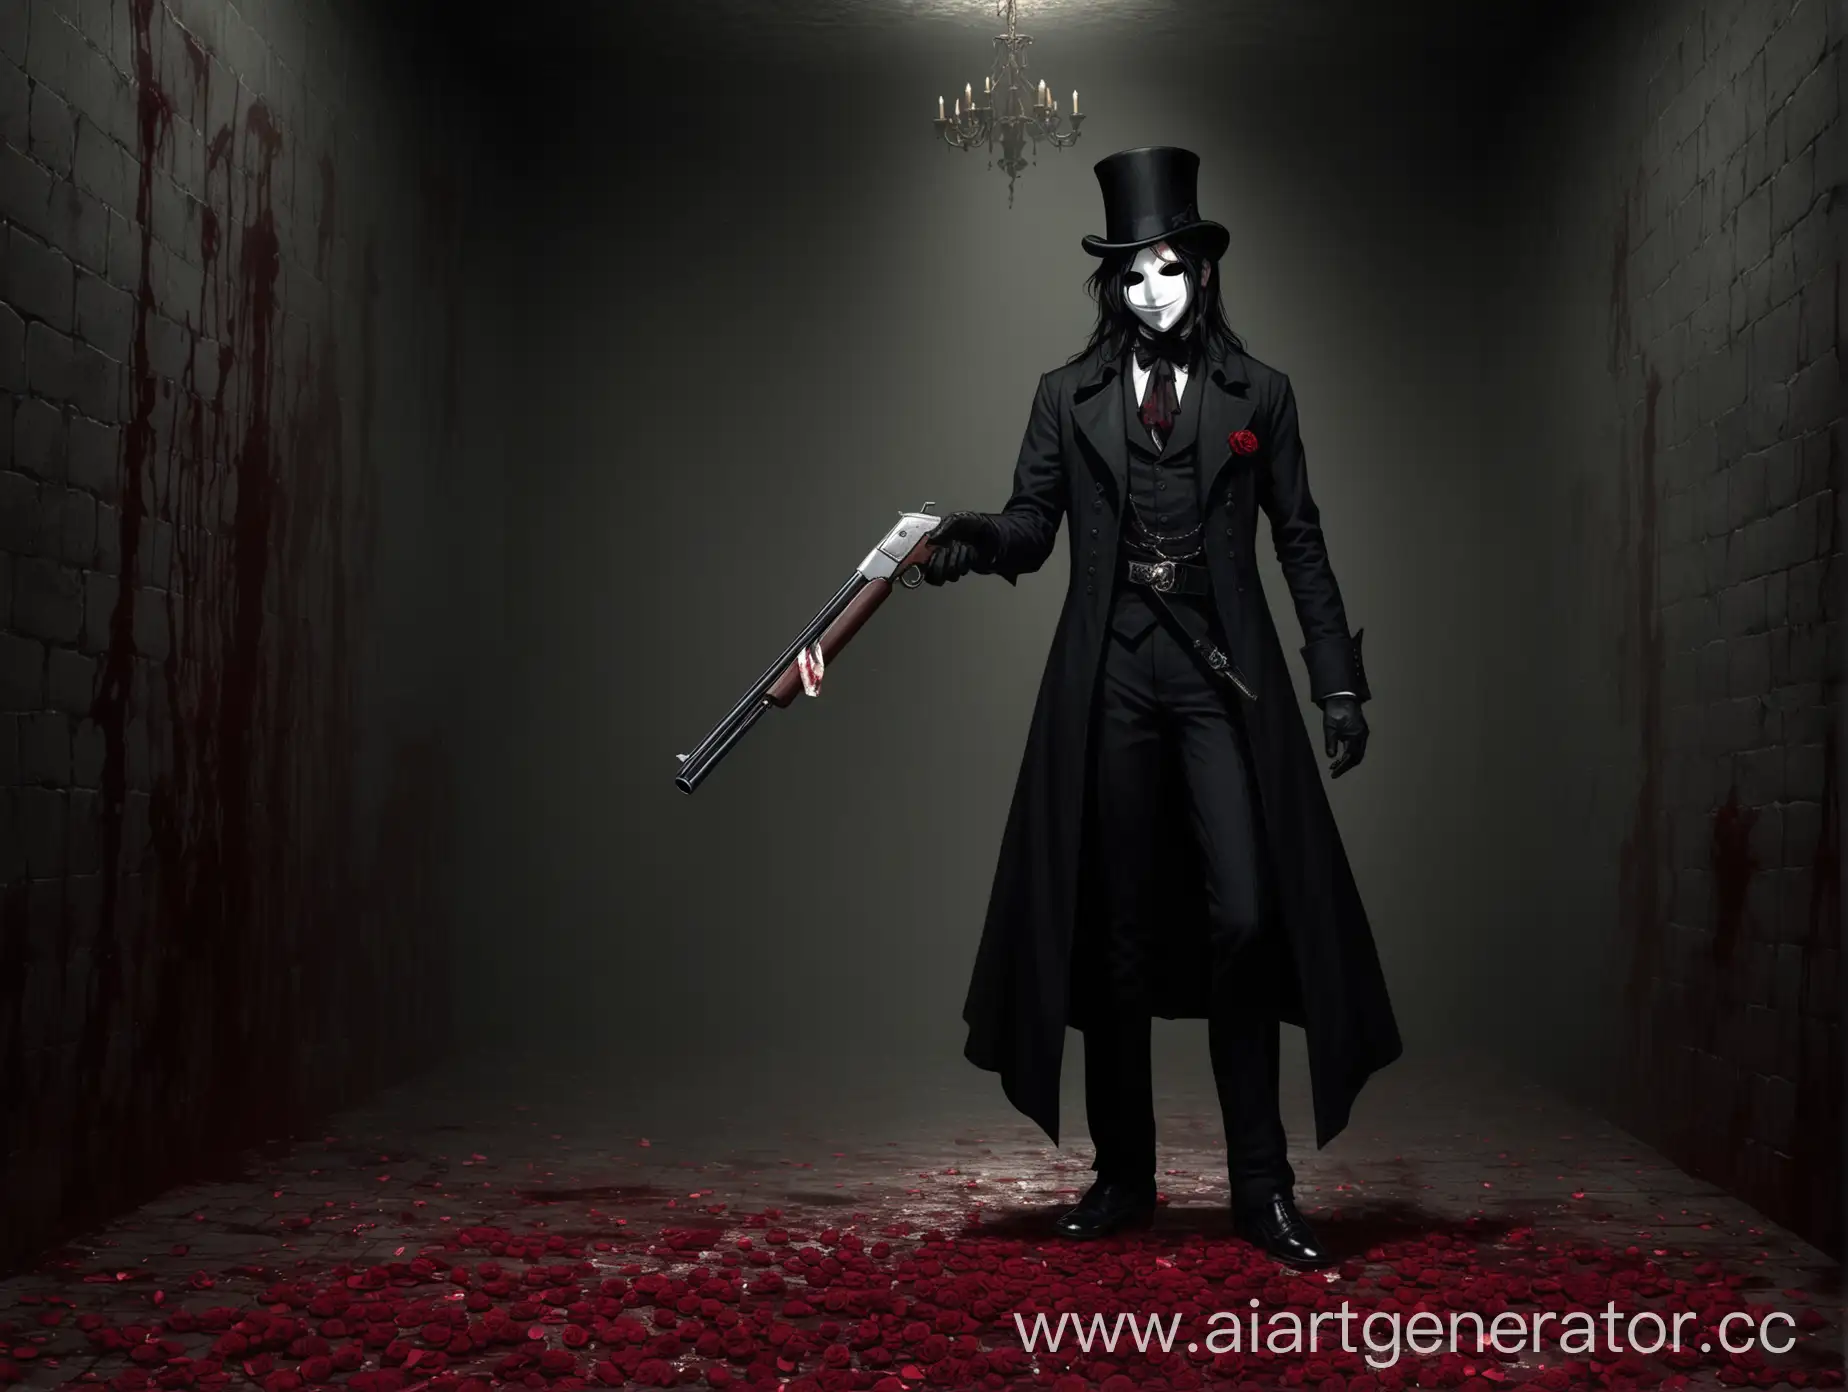 Man, thin, slim, full heigh, black long hair, victorian style, victorian black coat, black top hat, black gloves, black trousers, black belt, black shoes, with shotgun, rose in the hand, little rose on the right side of the chest, little cross on the chest, blood on the chest, white smiling mask with black eye slots, blood on the mask, rose petals underfoot, standing in the dark dungeon, blood on the dark walls